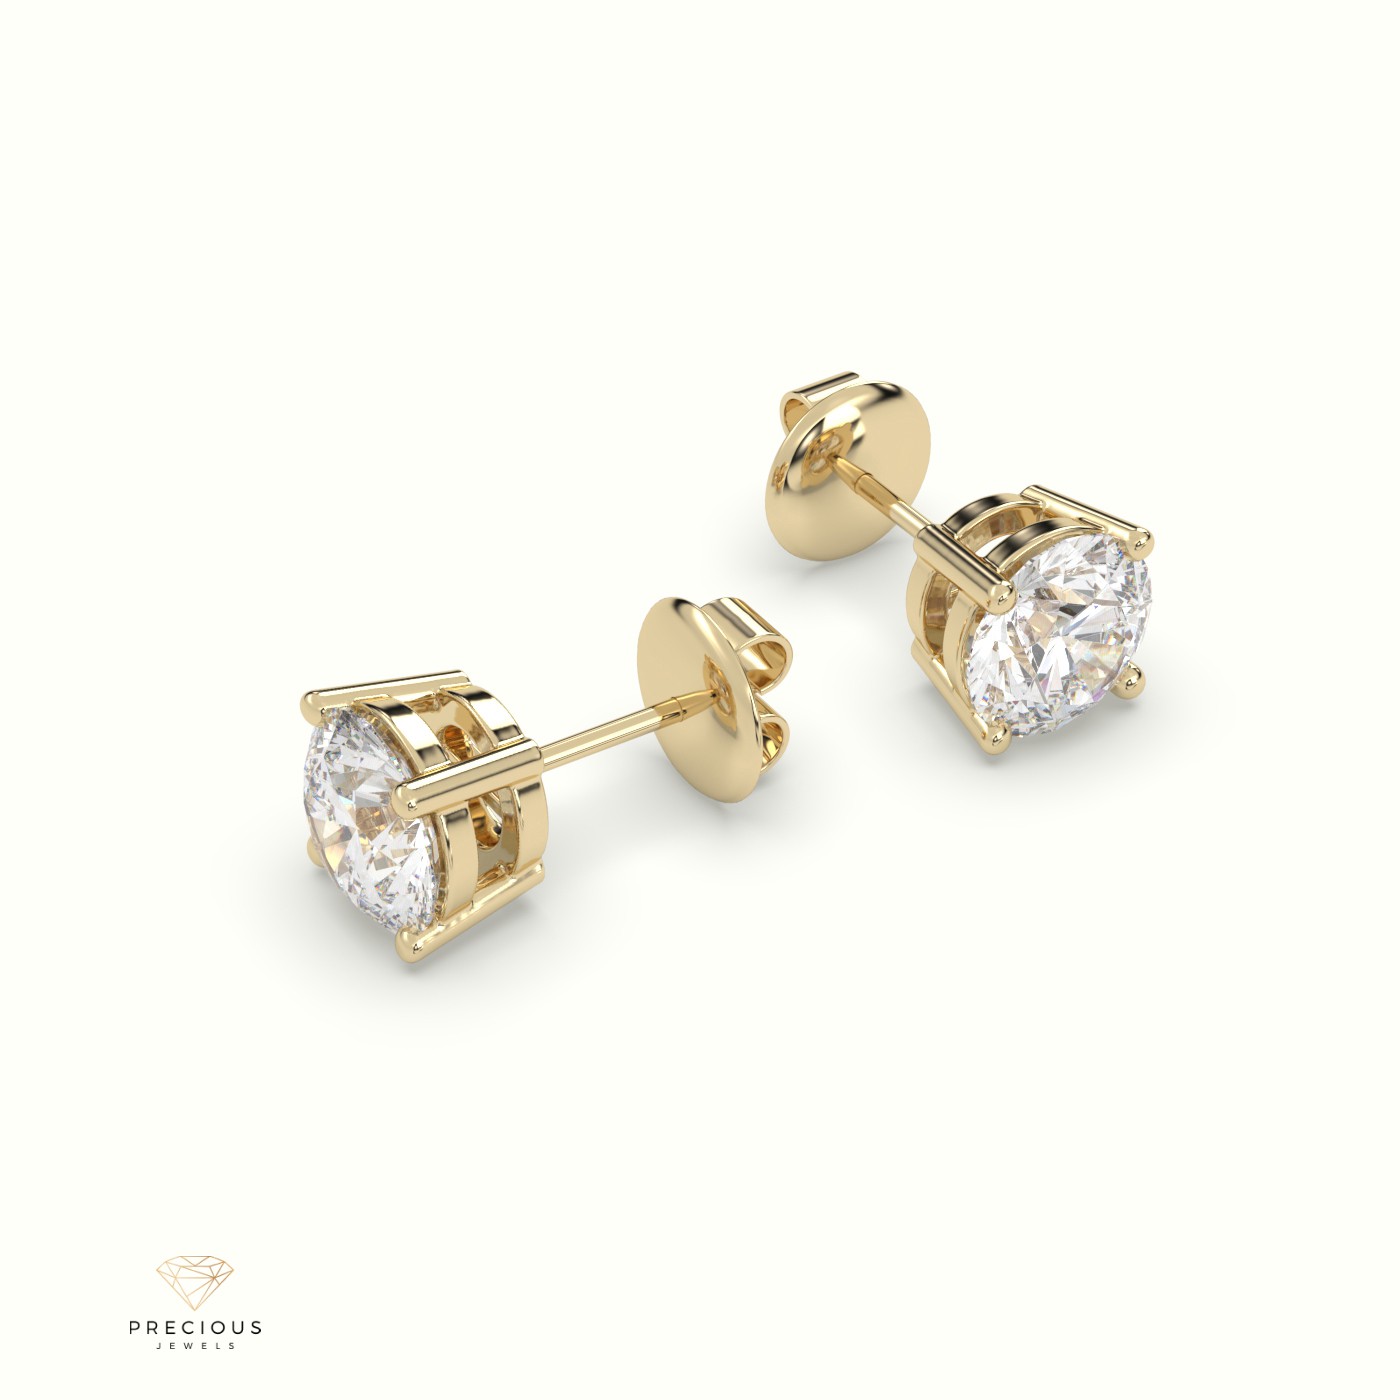 18k yellow gold  4 prongs classic round diamond earring studs Photos & images